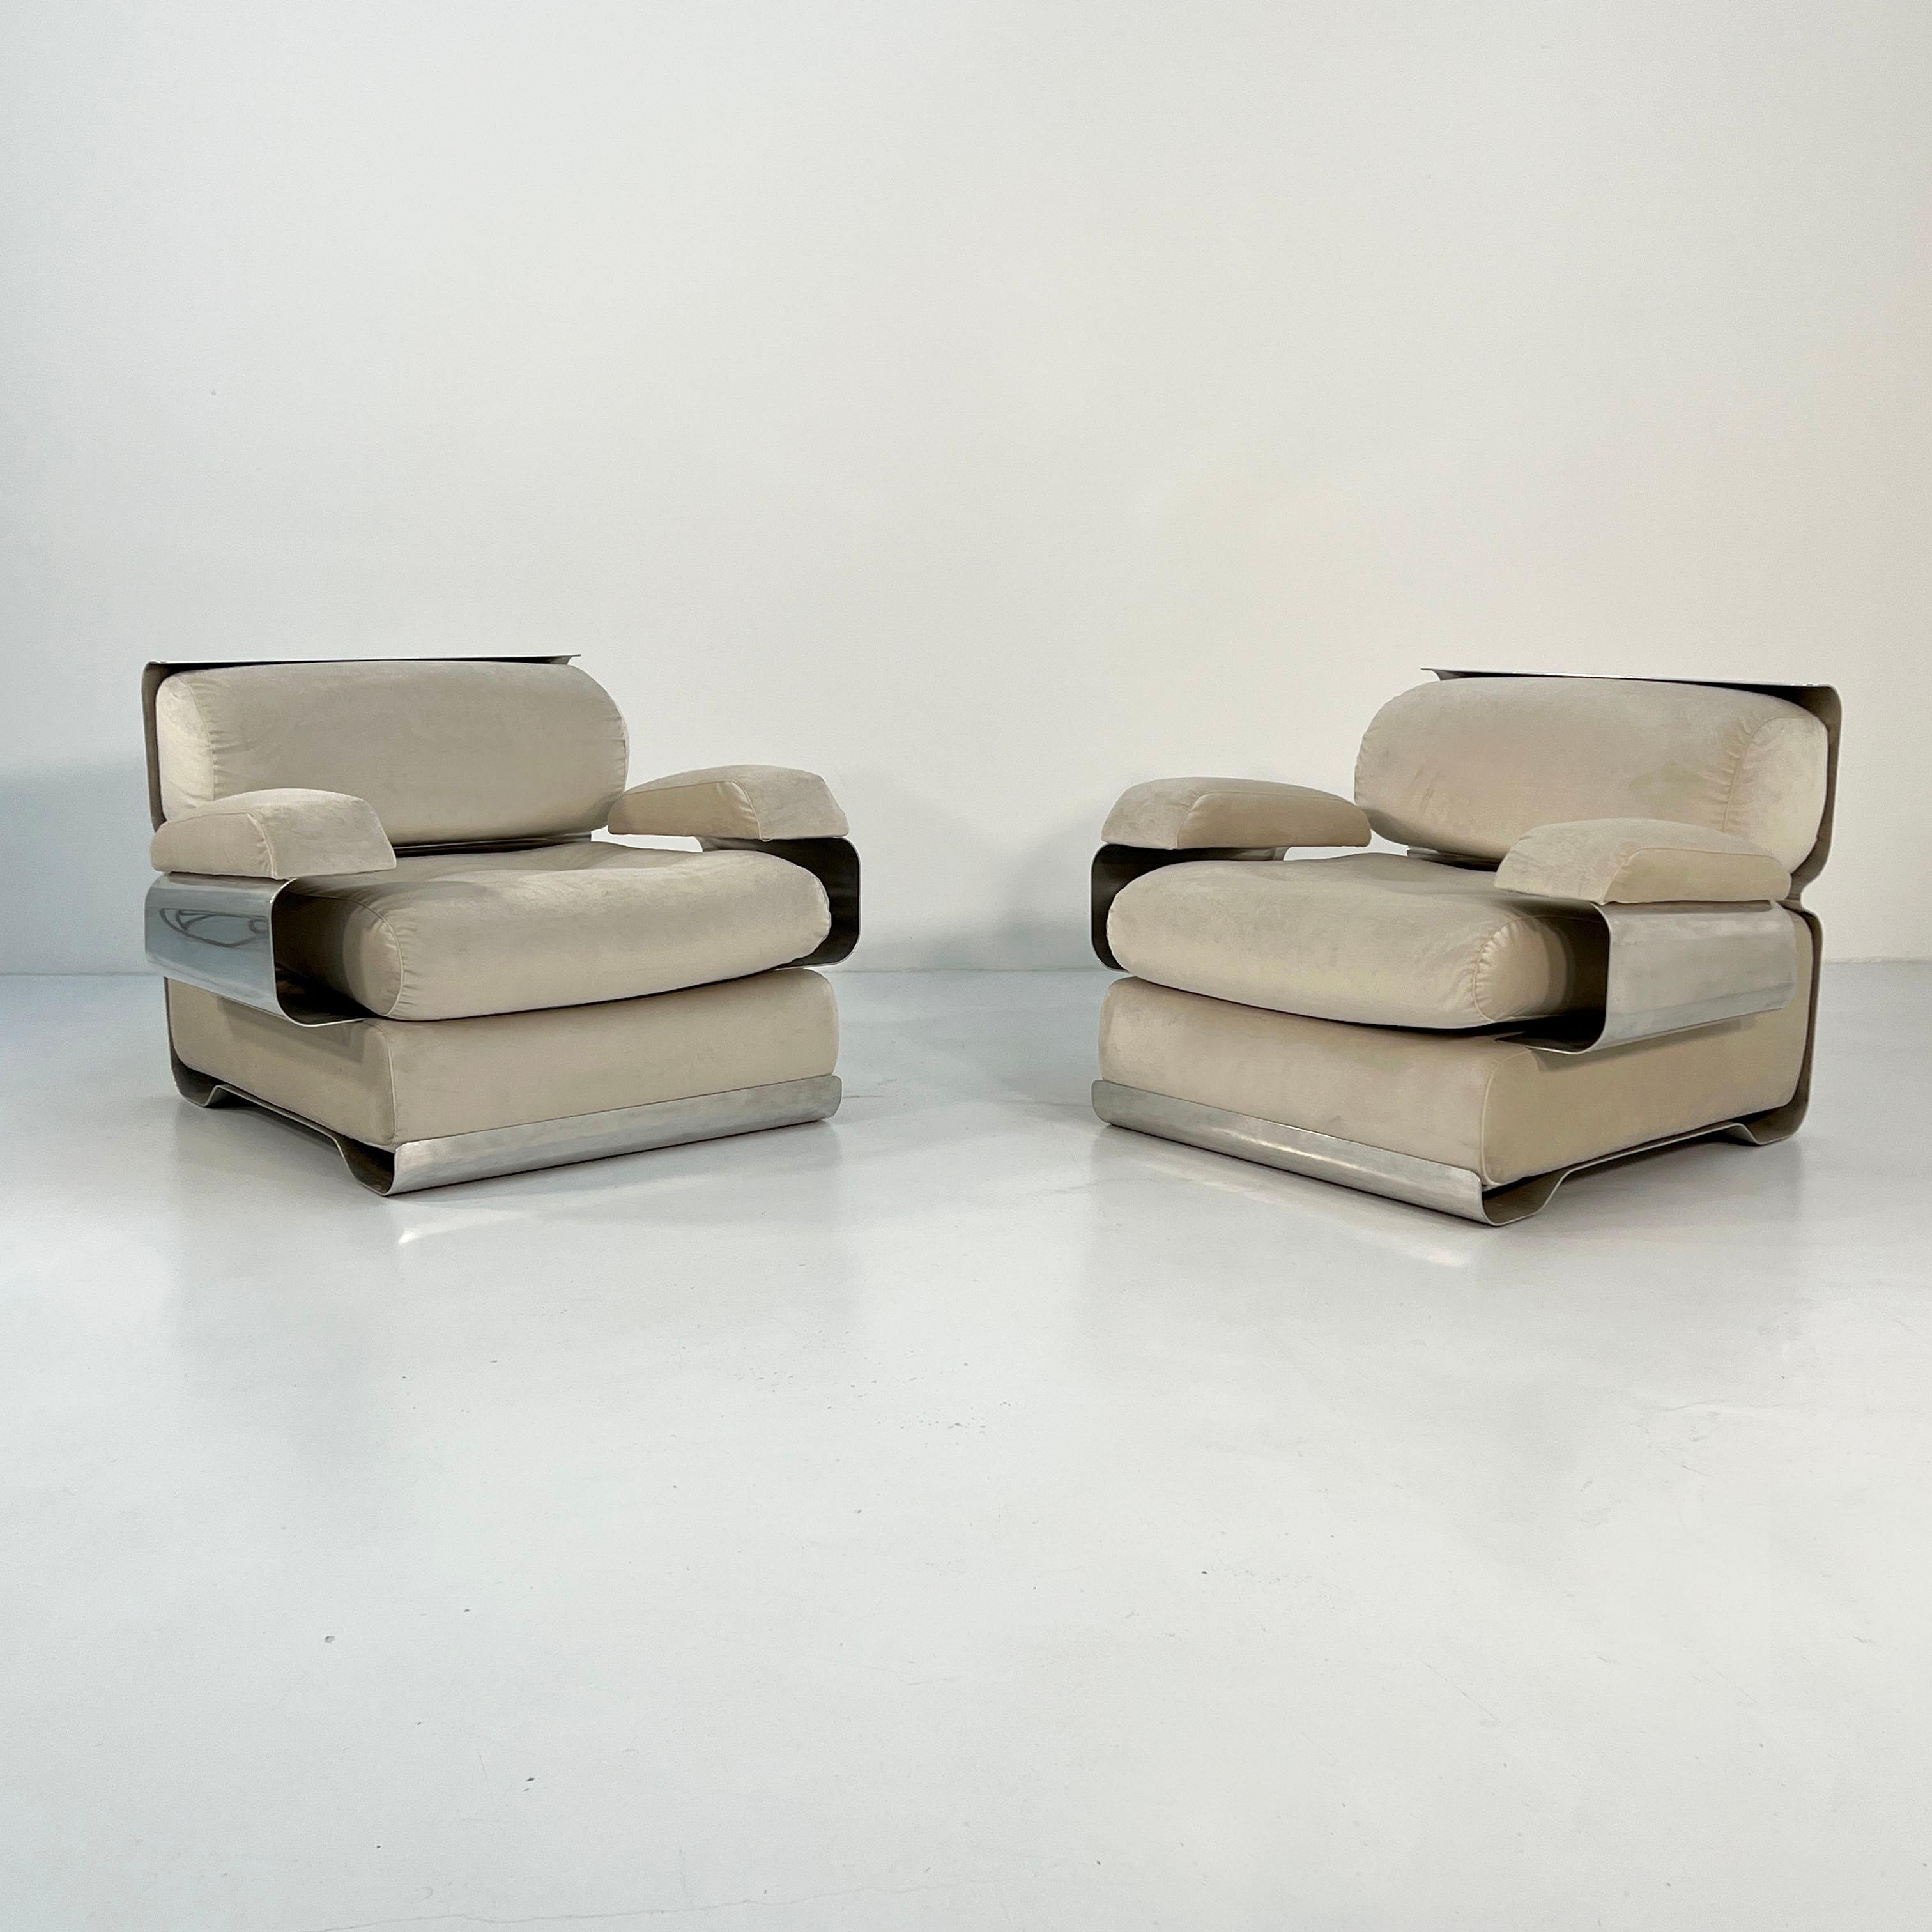 Designer - Gian Pietro Arosio
Producer - D.A.S
Design Period - Seventies
Measurements - Width 88 cm x Depth 81 cm x Height 67 cm x Seat Height 40 cm
Materials - Fabric, Metal
Color - Sand, Silver 
Light wear consistent with age and use. Some scuffs